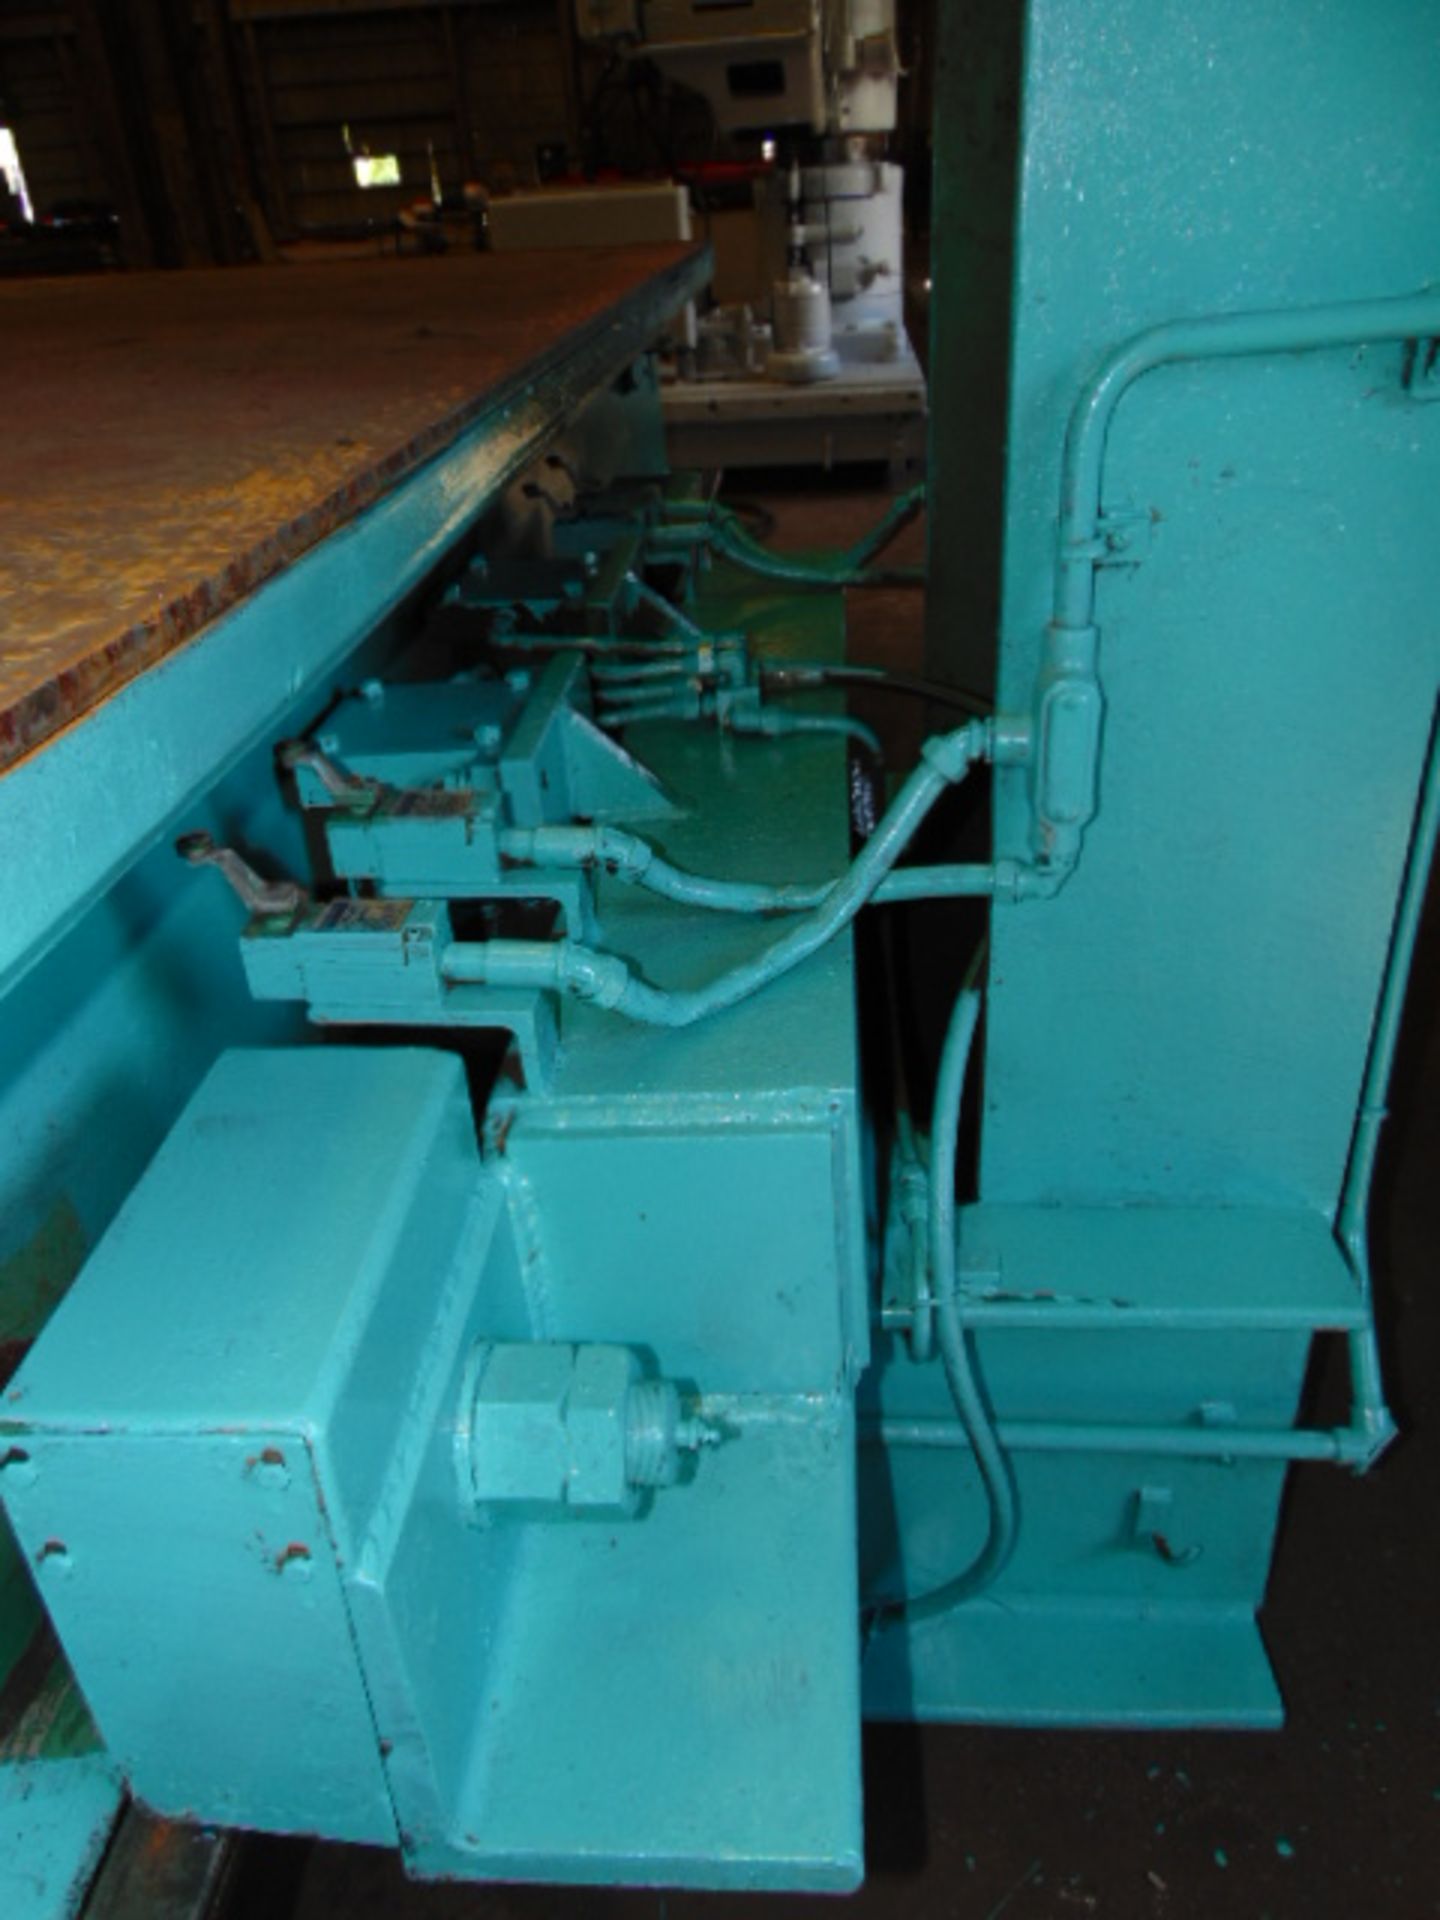 TRAVELING FRAME STRAIGHTENING PRESS, DAKE 300 T. CAP. MDL. 19-418, 98' W. x 152" L. bed, approx. 36" - Image 10 of 12